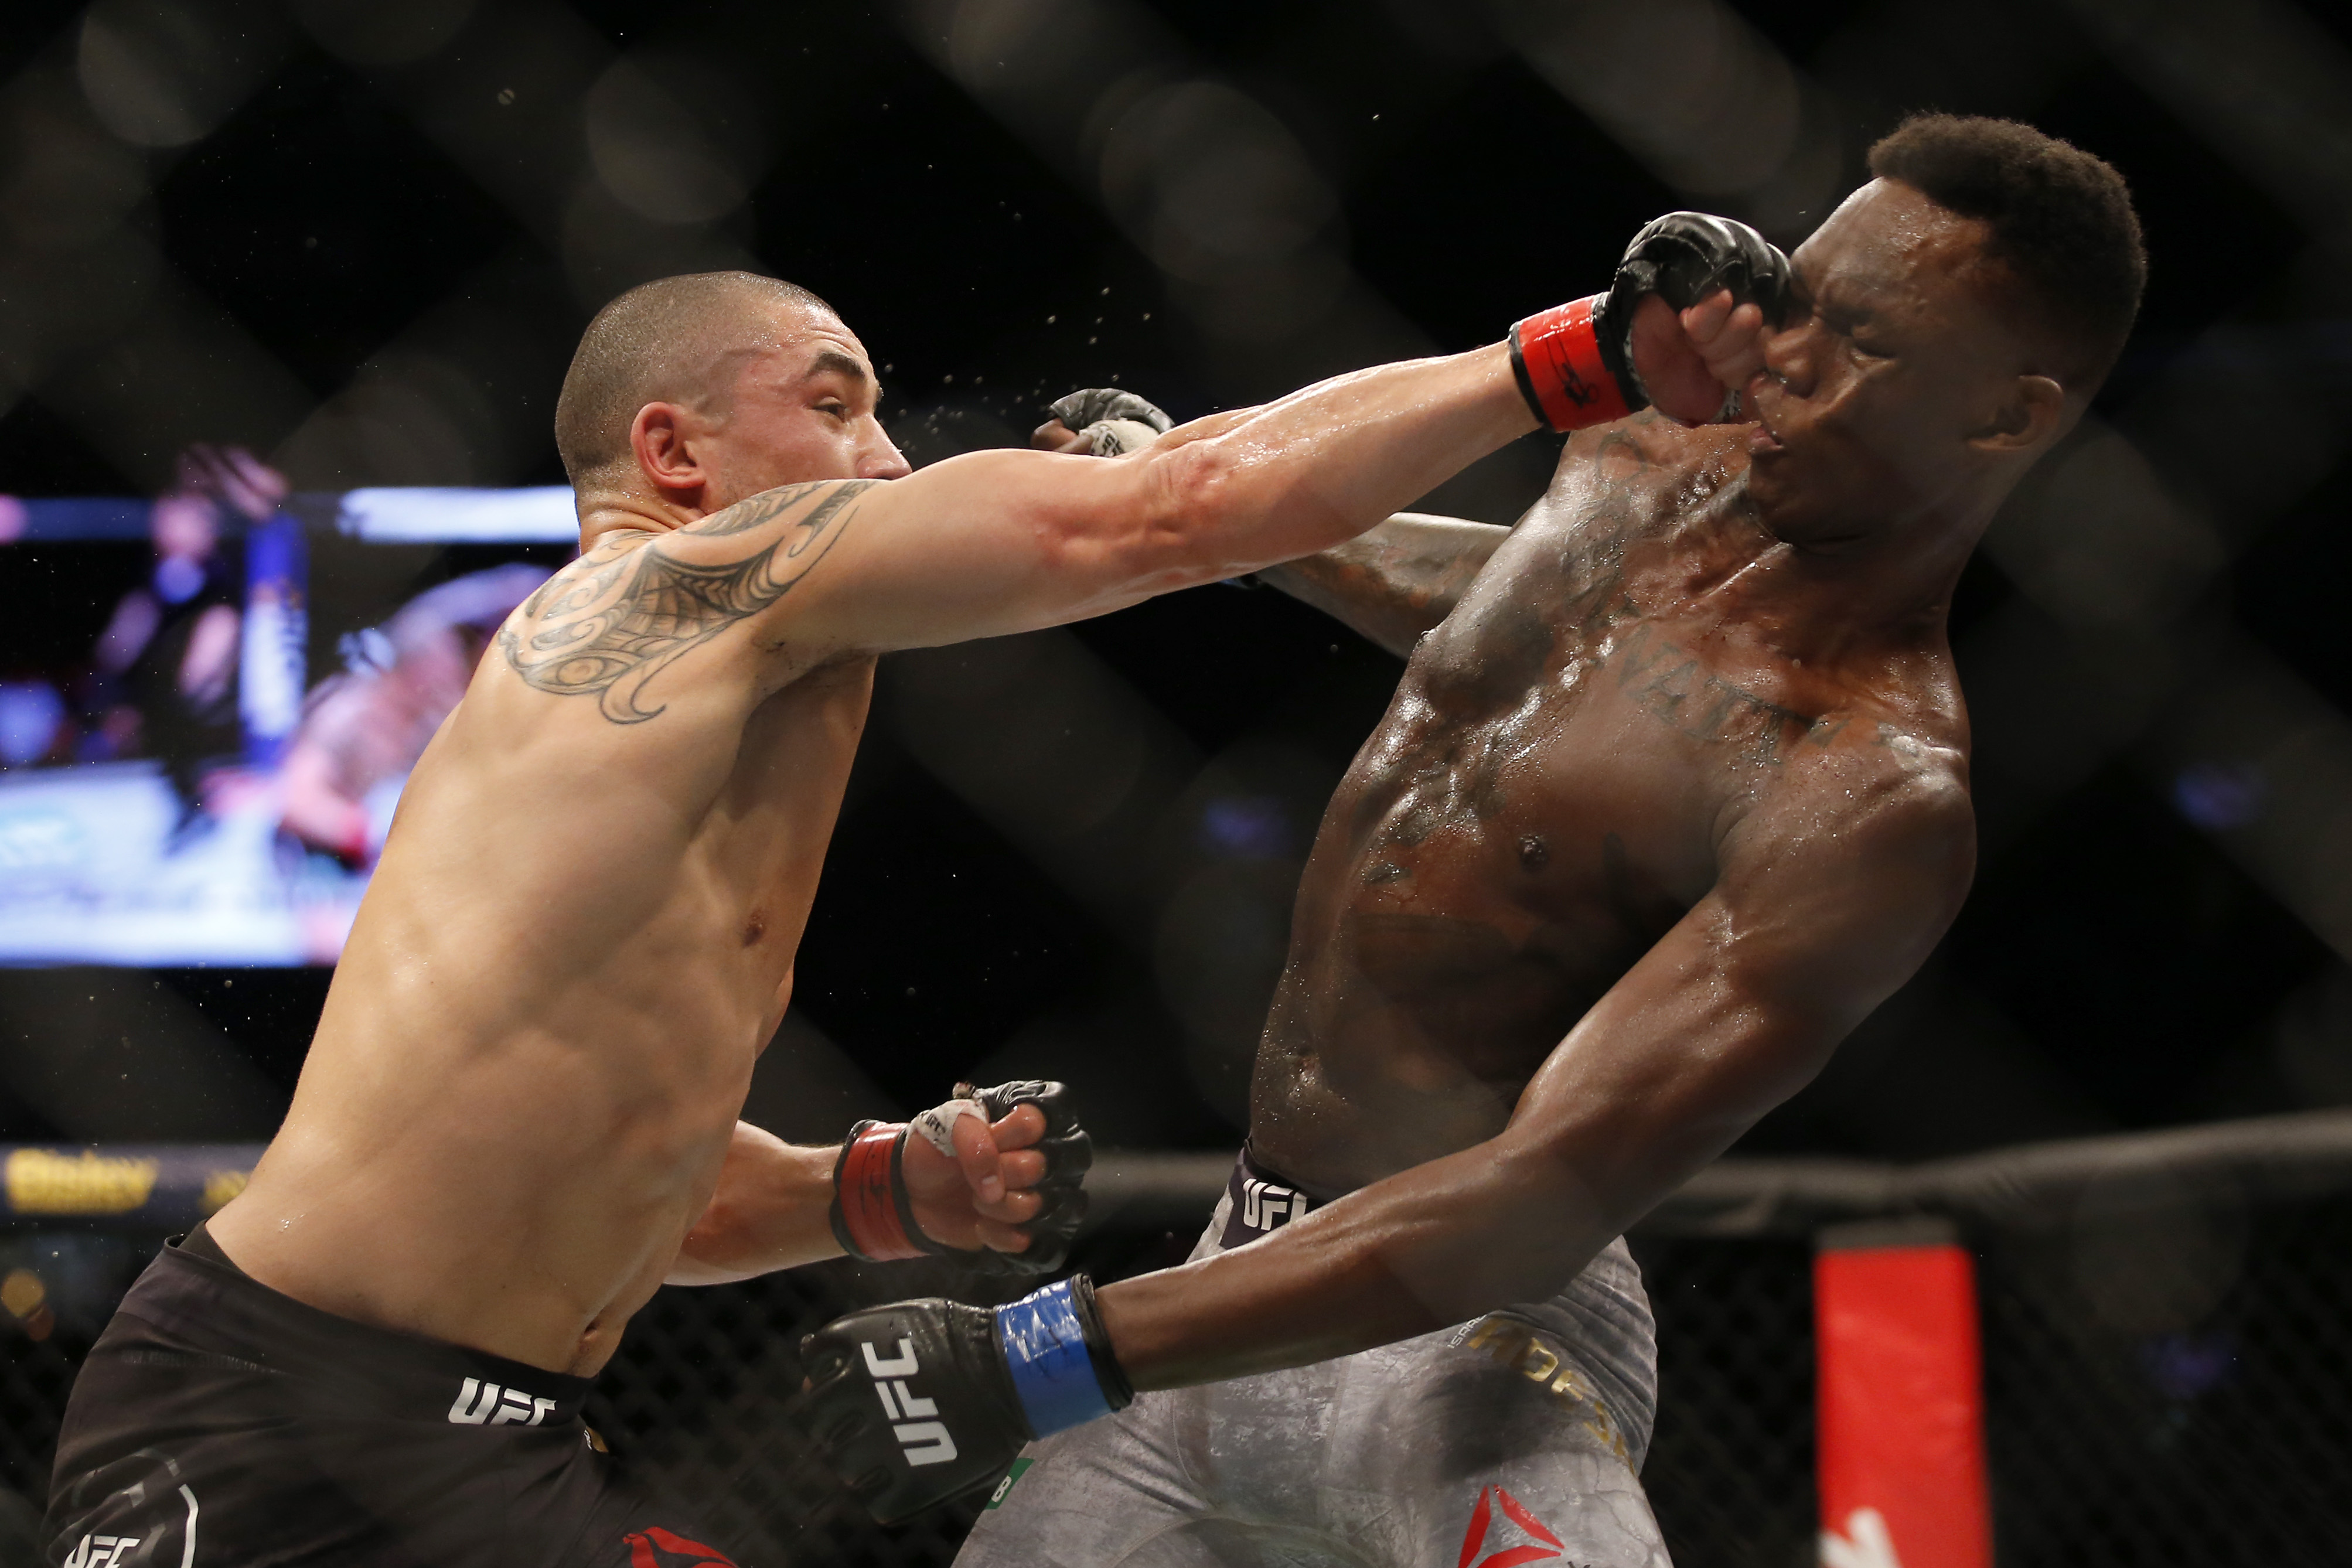 Robert Whittaker and Israel Adesanya fight in the Middleweight title bout during UFC 243 at Marvel Stadium on October 06, 2019 in Melbourne, Australia.